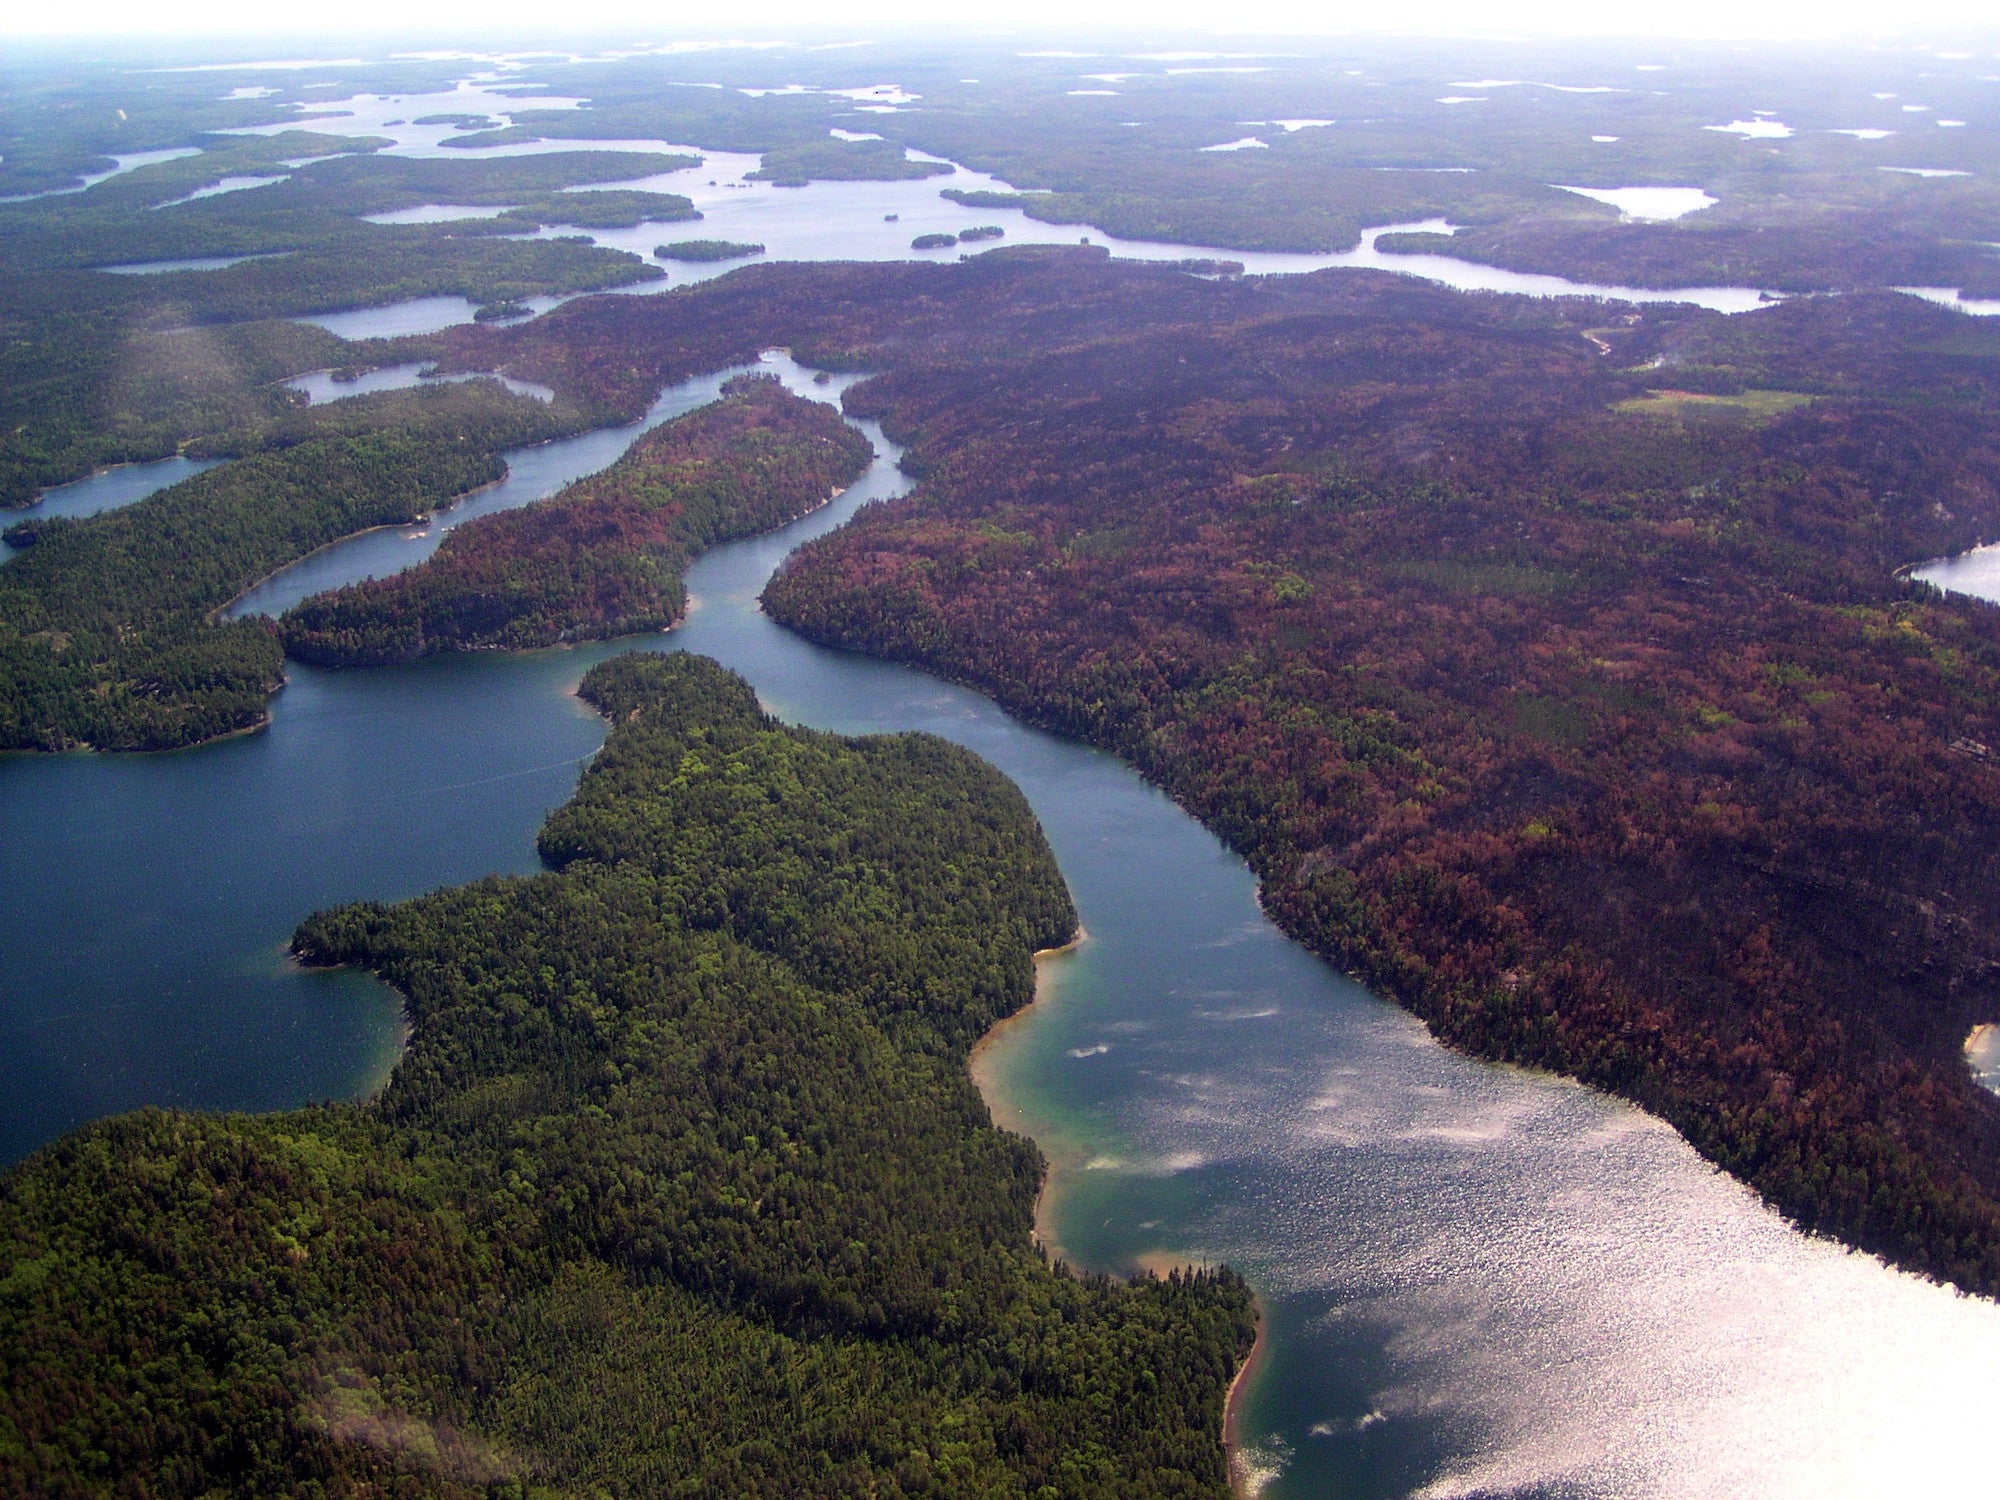 Voyageurs National Park in Minnesota is abundant with lakes and wetlands.